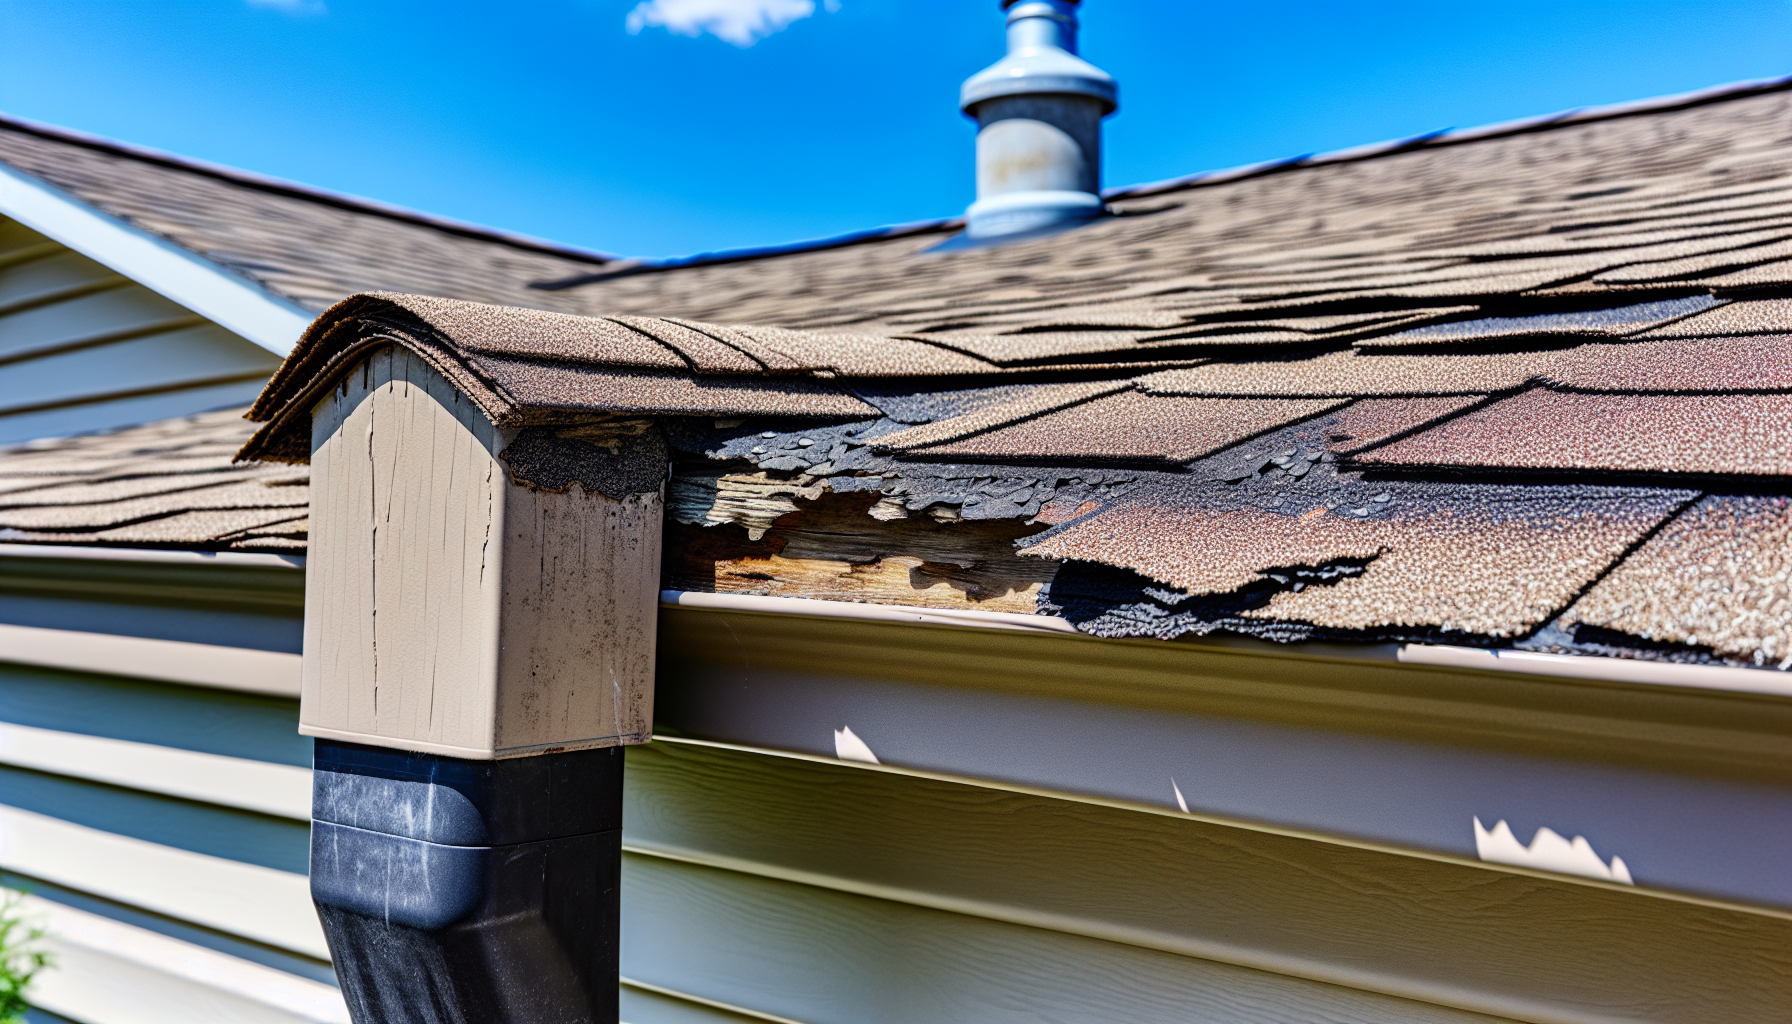 Signs of wear and tear on a shingle roof